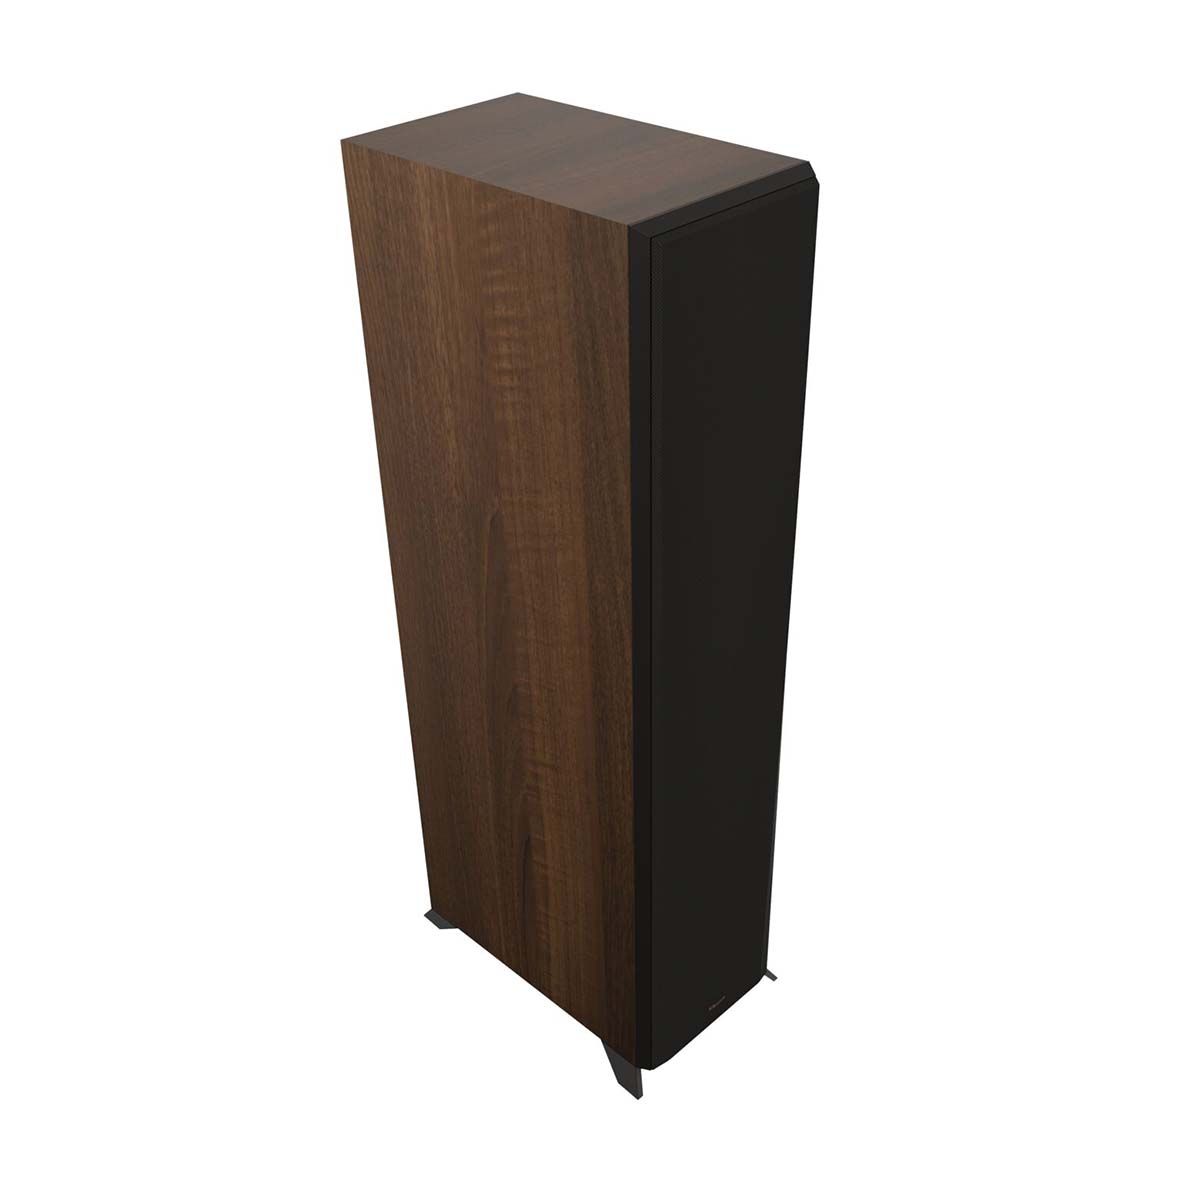 Klipsch RP-8000F II Floorstanding Speaker - Walnut - angled front view with grill